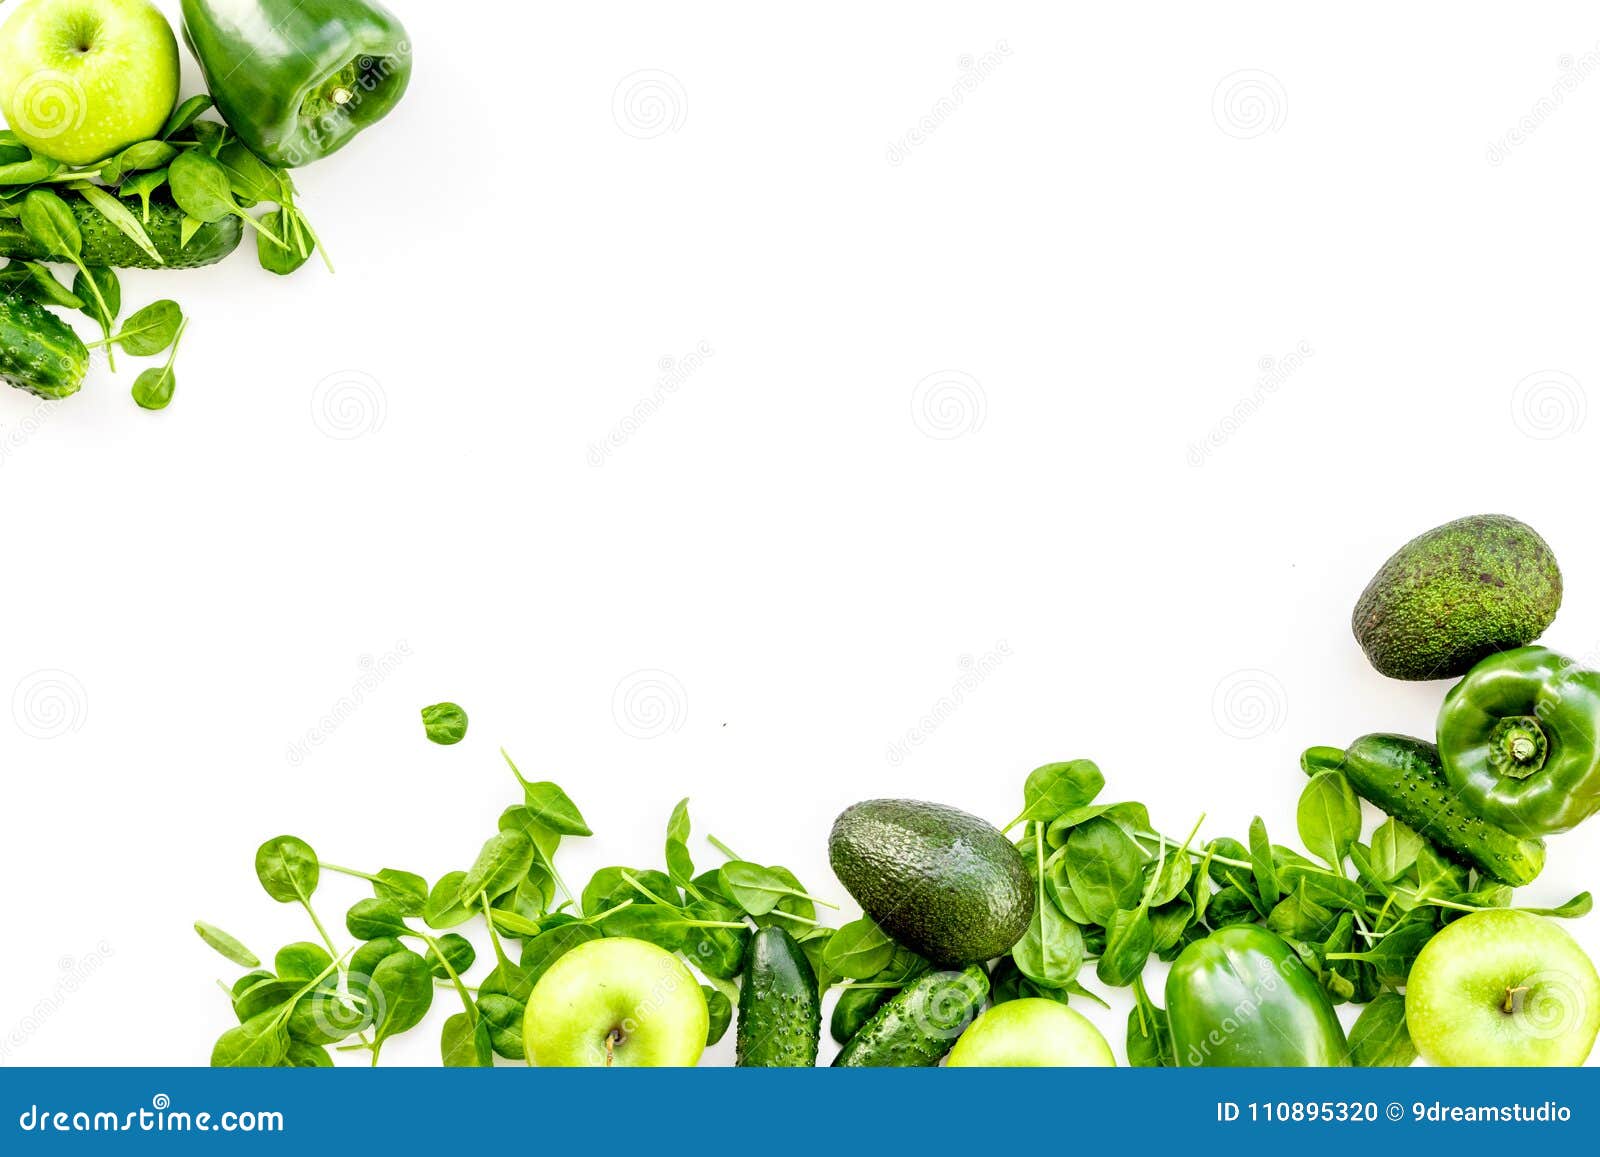 Green Vegetables Background. Shiny Bell Pepper, Cucumber, Arugula Salad,  Avocado and Fresh Apple on White Background Top Stock Photo - Image of  freshness, gourmet: 110895320